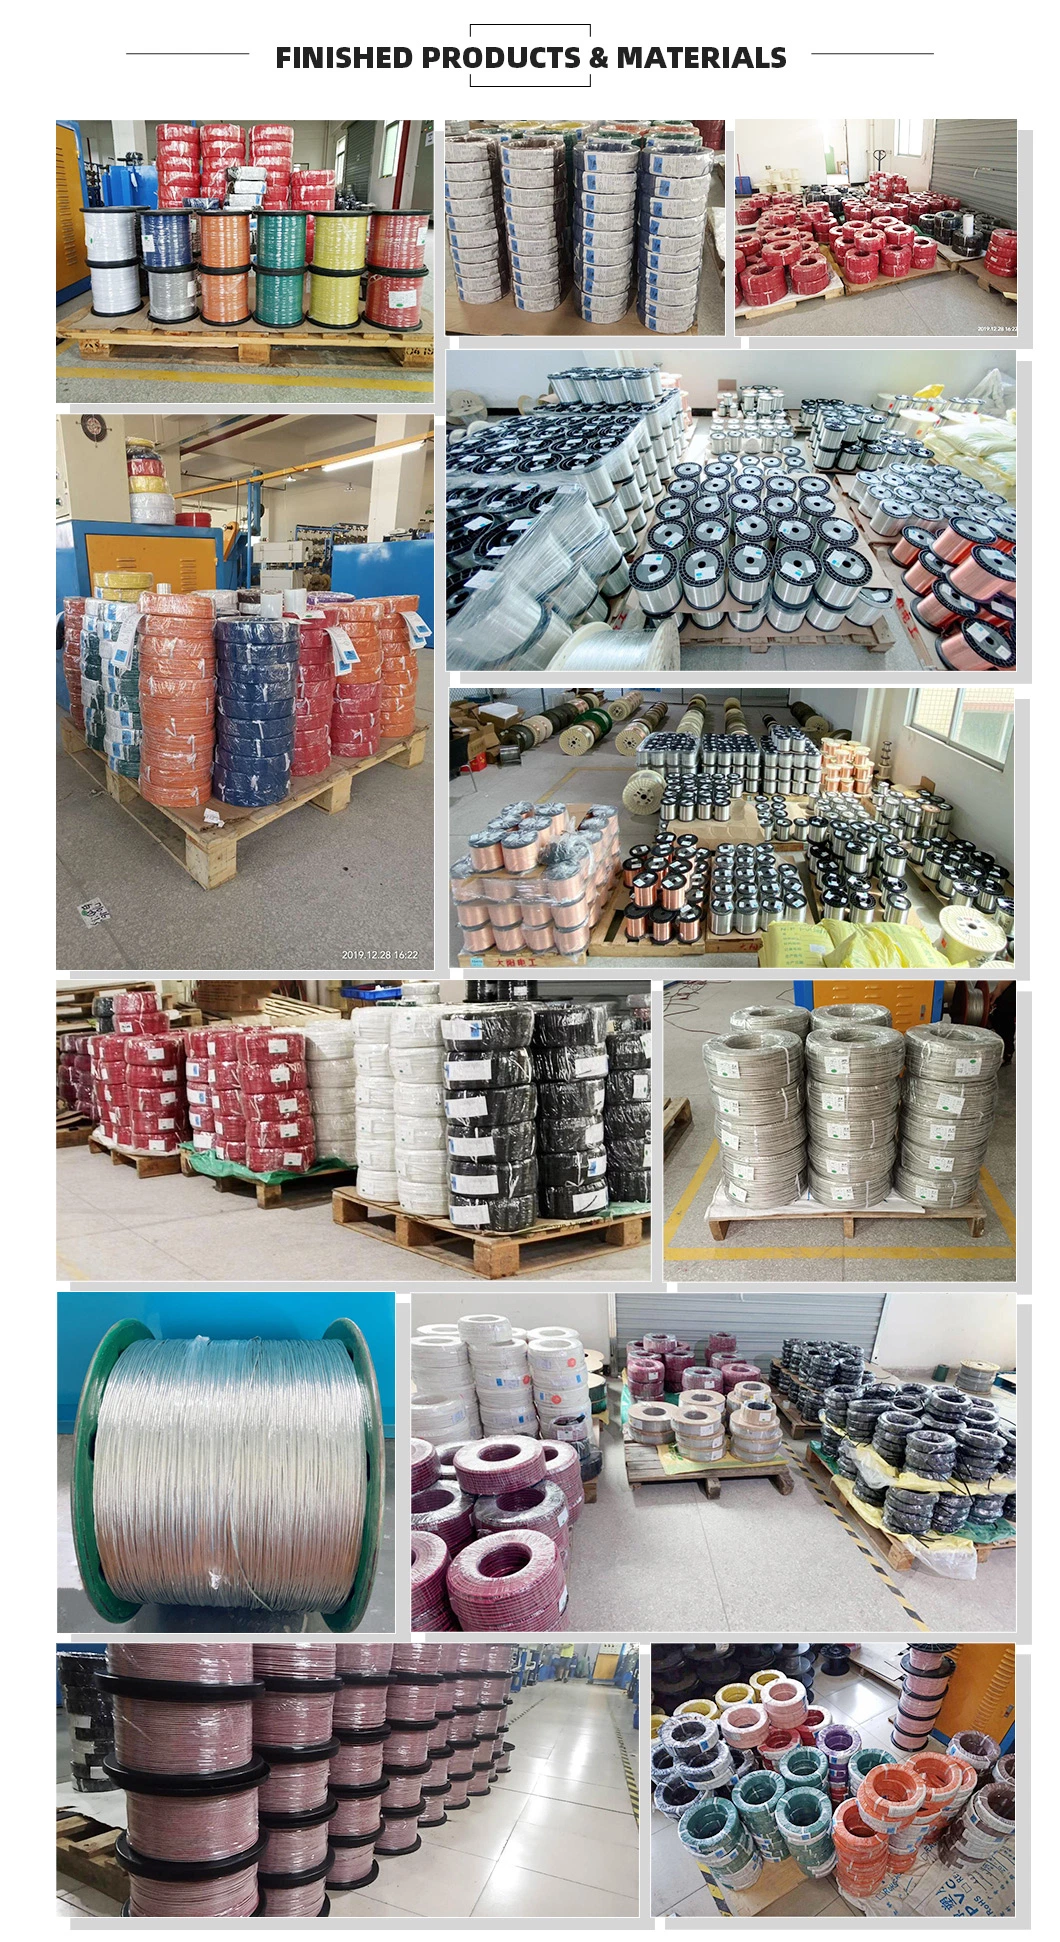 Electrical House Wiring High Temperature Industry PFA Cable for Interval Wiring of Appliance